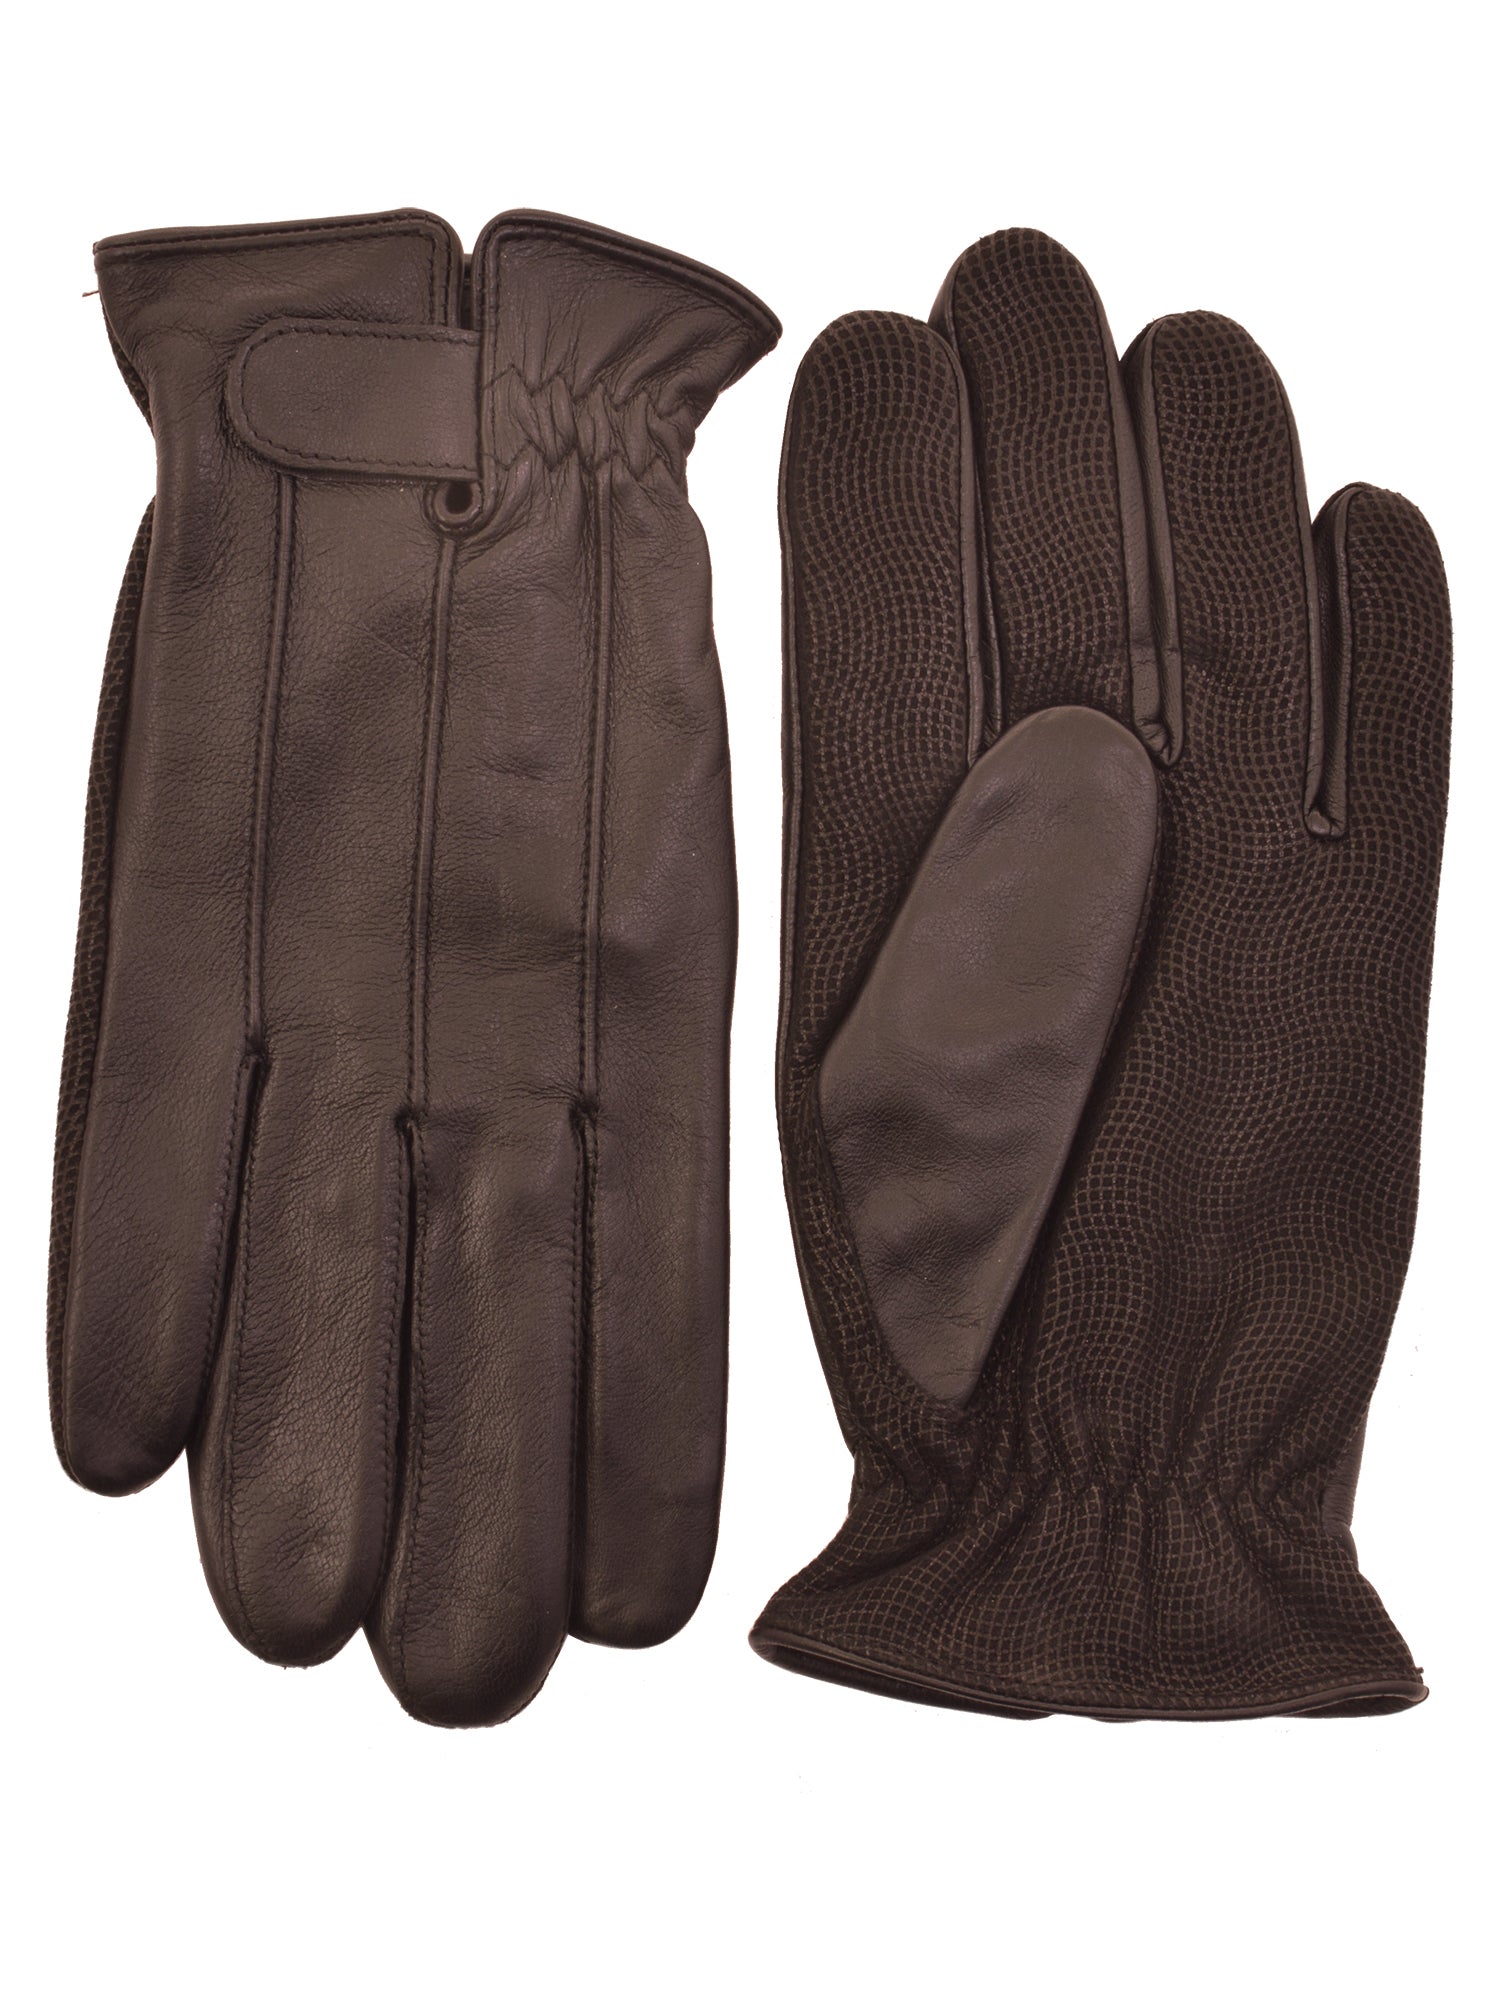 Lauer Sheepskin Leather Driving Gloves by Milwaukee in Brown - 1807-BRN